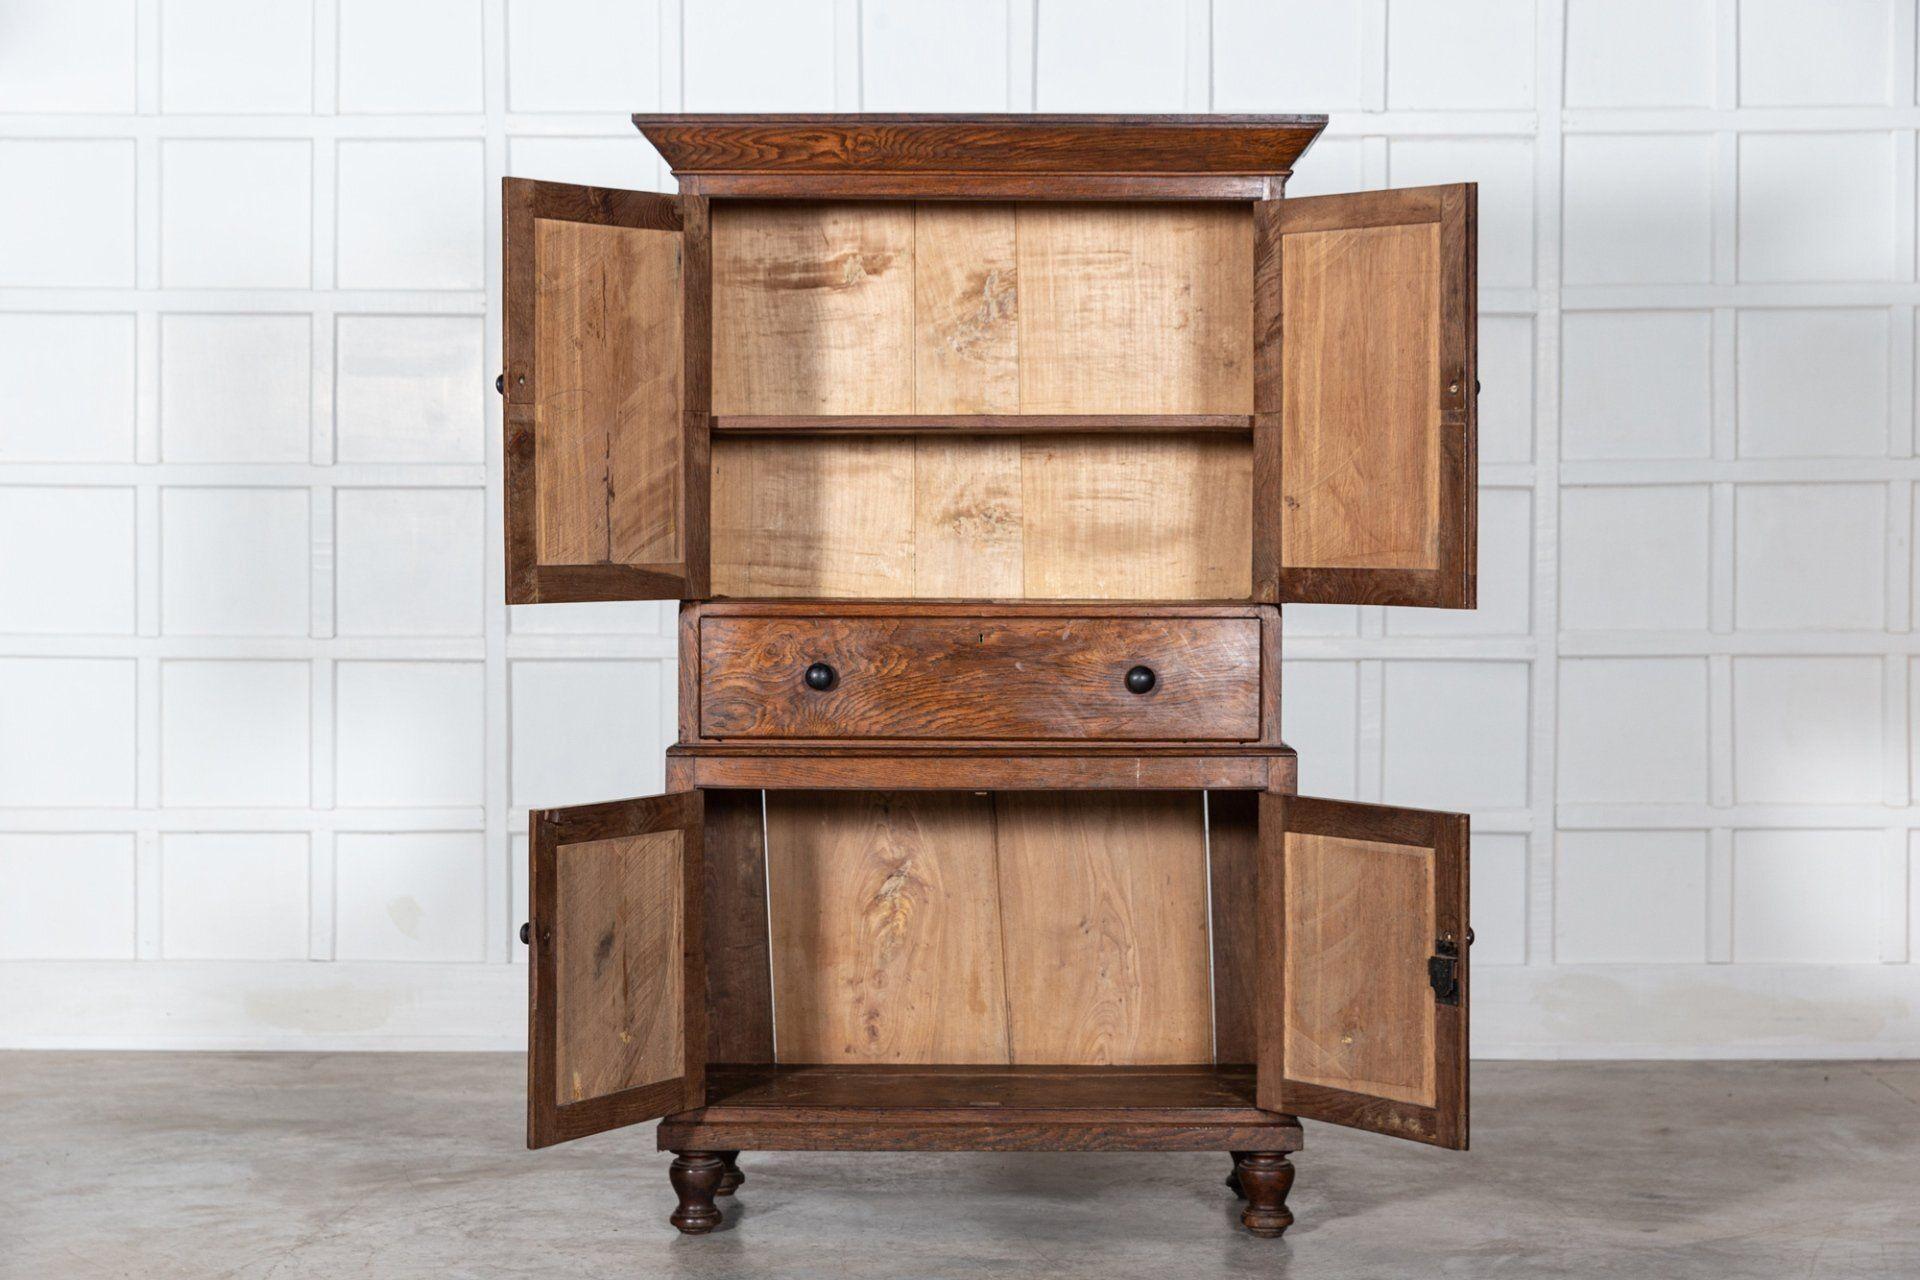 Circa 1850
19th C English oak & elm housekeepers cupboard.
sku 1270
Excellent form and colour.
W119 x D54 x H194 cm.
Base W112 x D50 x H86 cm.
Top W119 x D54 x H108 cm.